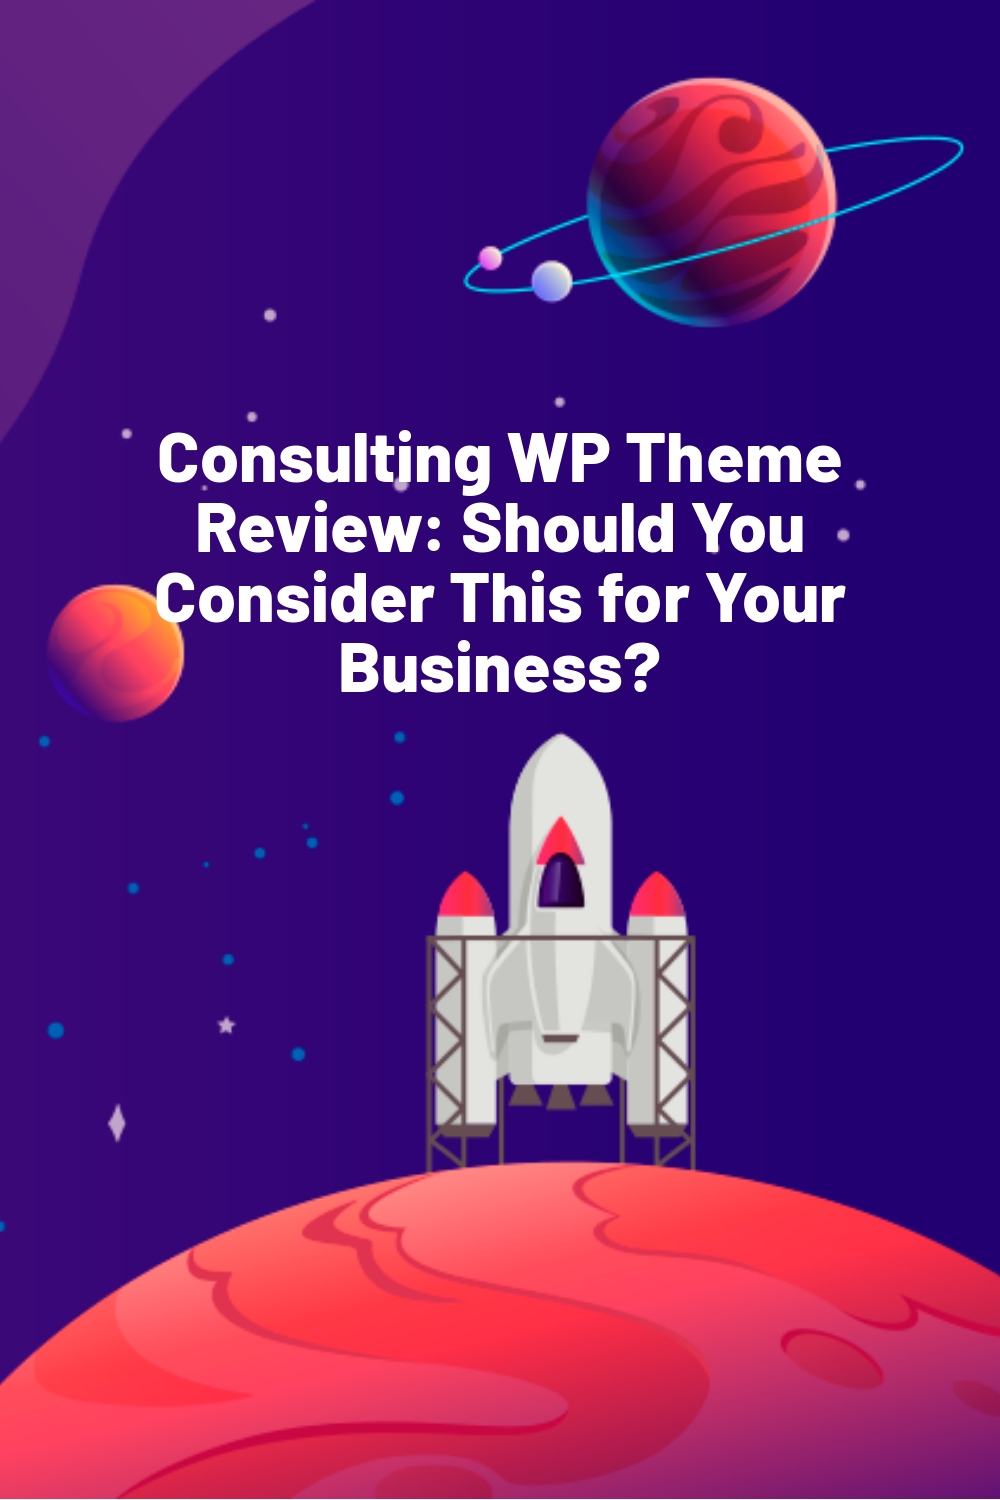 Consulting WP Theme Review: Should You Consider This for Your Business?